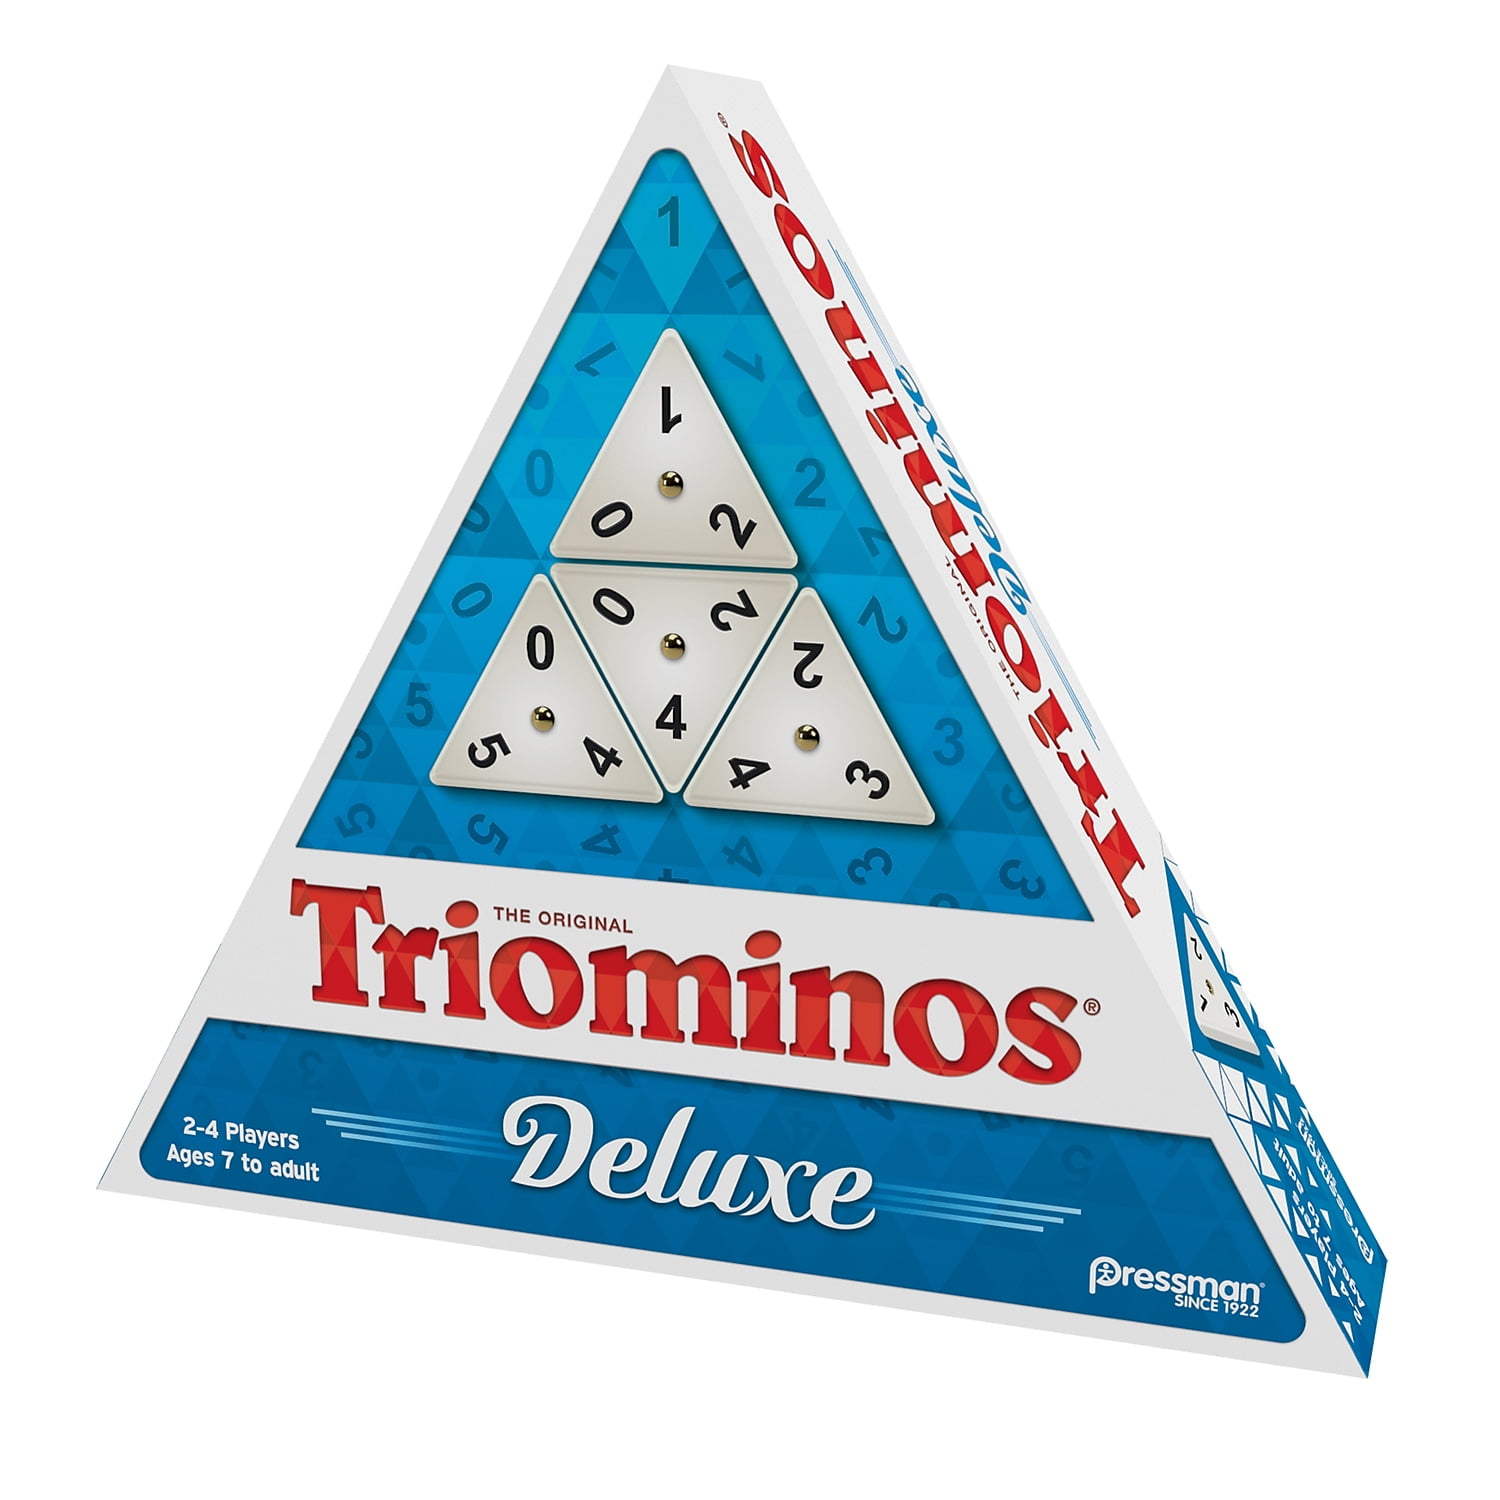 Pressman Deluxe Tri-Ominos Game - The Domino Game With a Three-Sided Twist